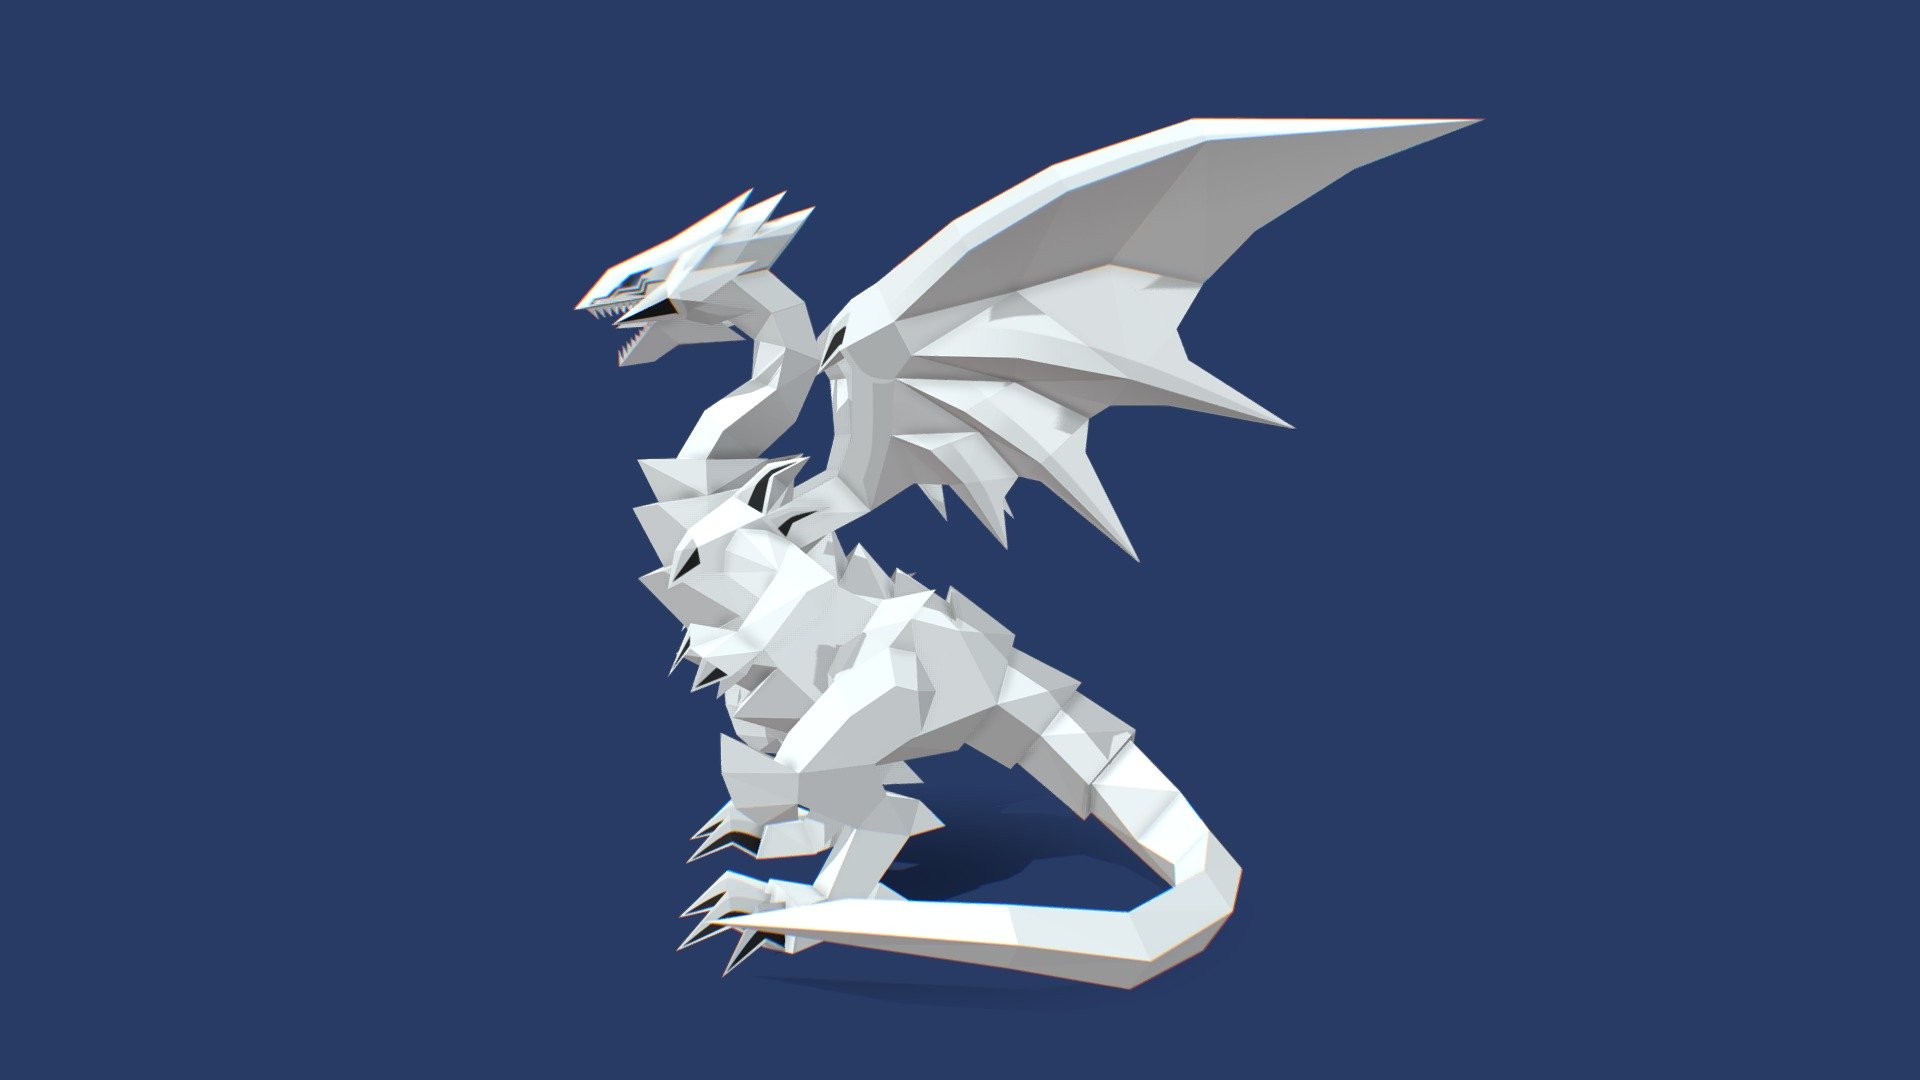 Low poly papercraft inspired by iconic dragon from Yugioh franchise.

You can buy this template(not the 3d model) on etsy. Probably the keyword is Blue Eyes White Dragon Papercraft 3d model